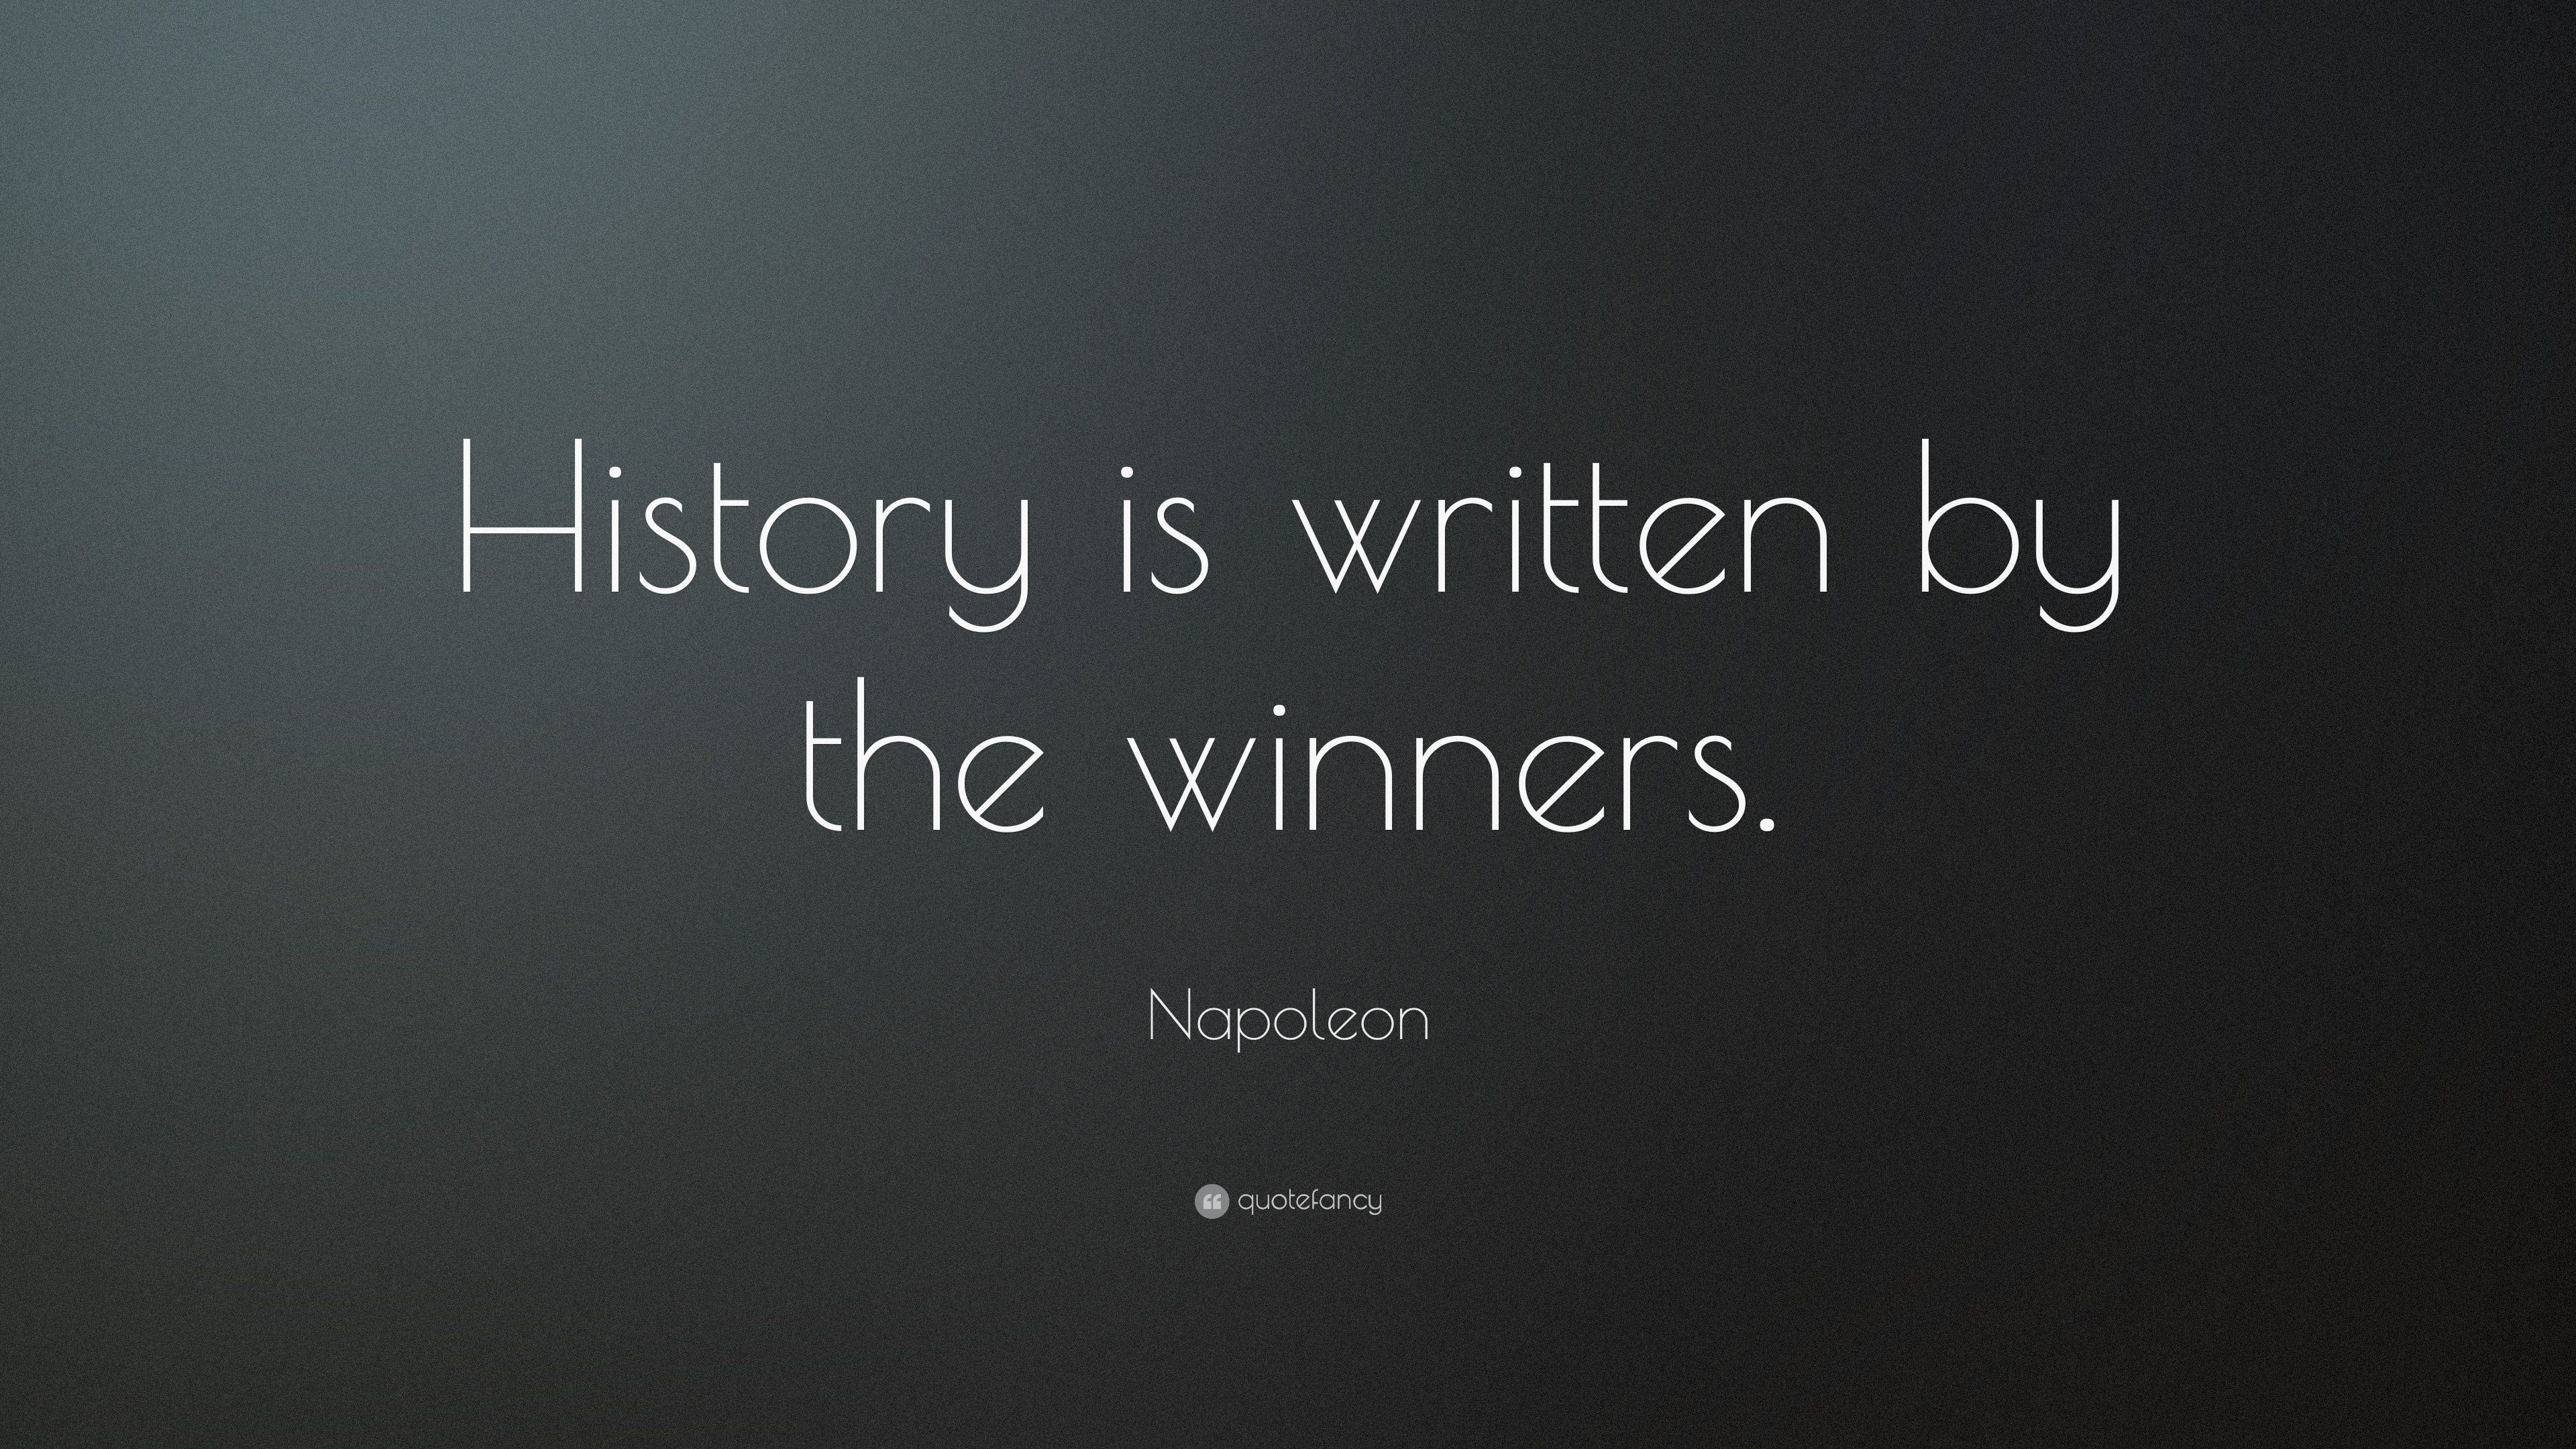 Napoleon Quote: “History is written by the winners.” 22